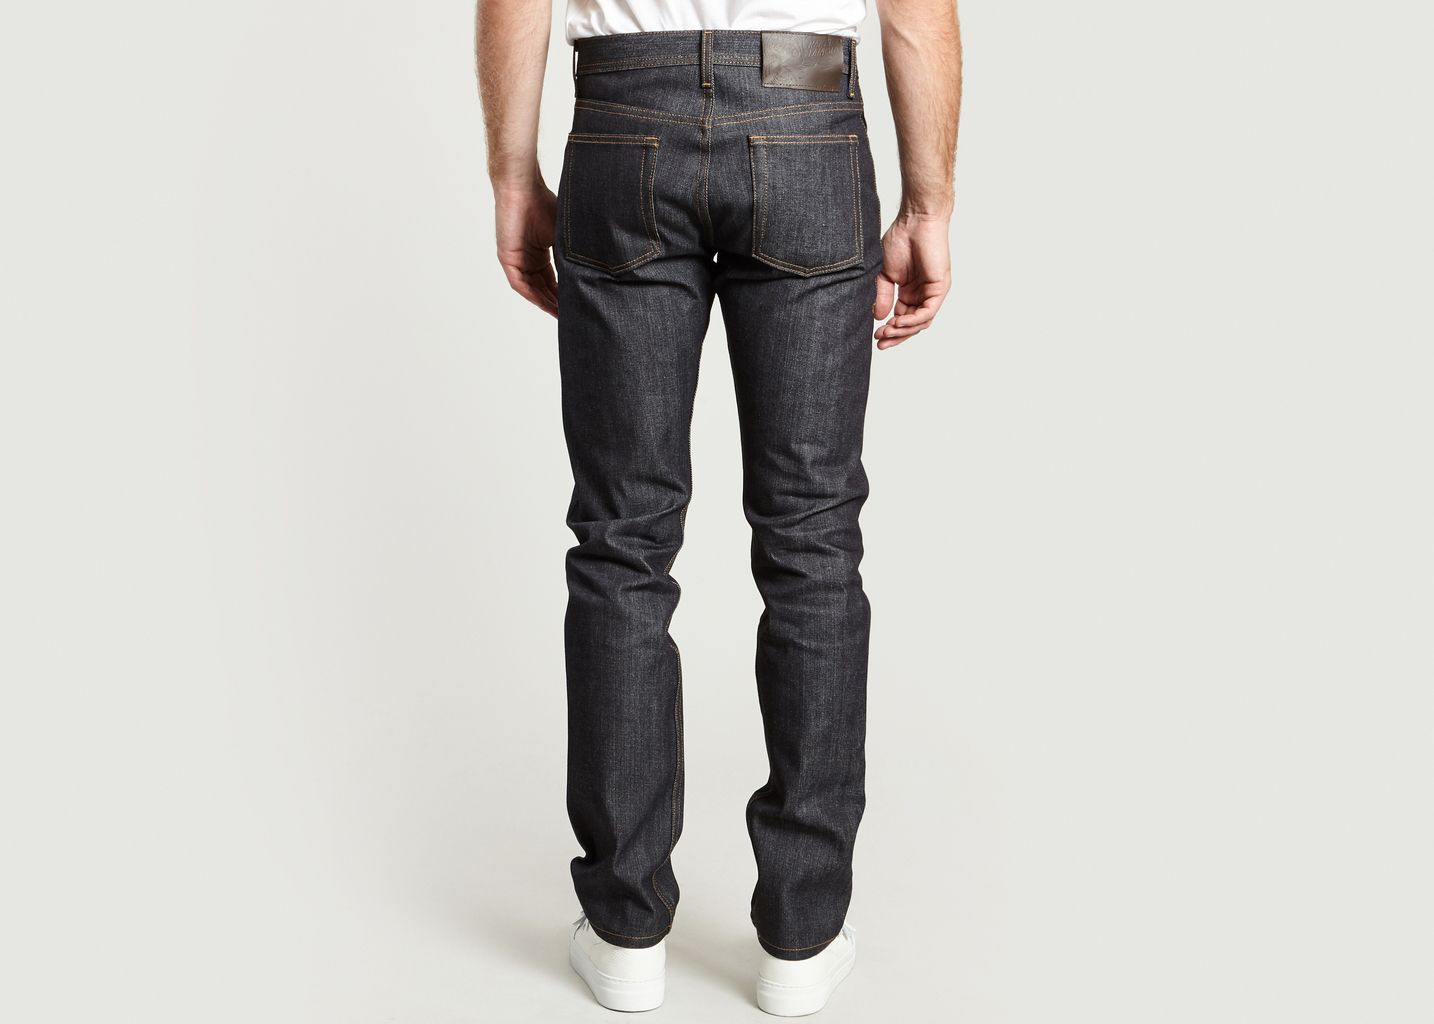 Jean Weird Guy Selvedge Left Hand Twill - Naked and Famous